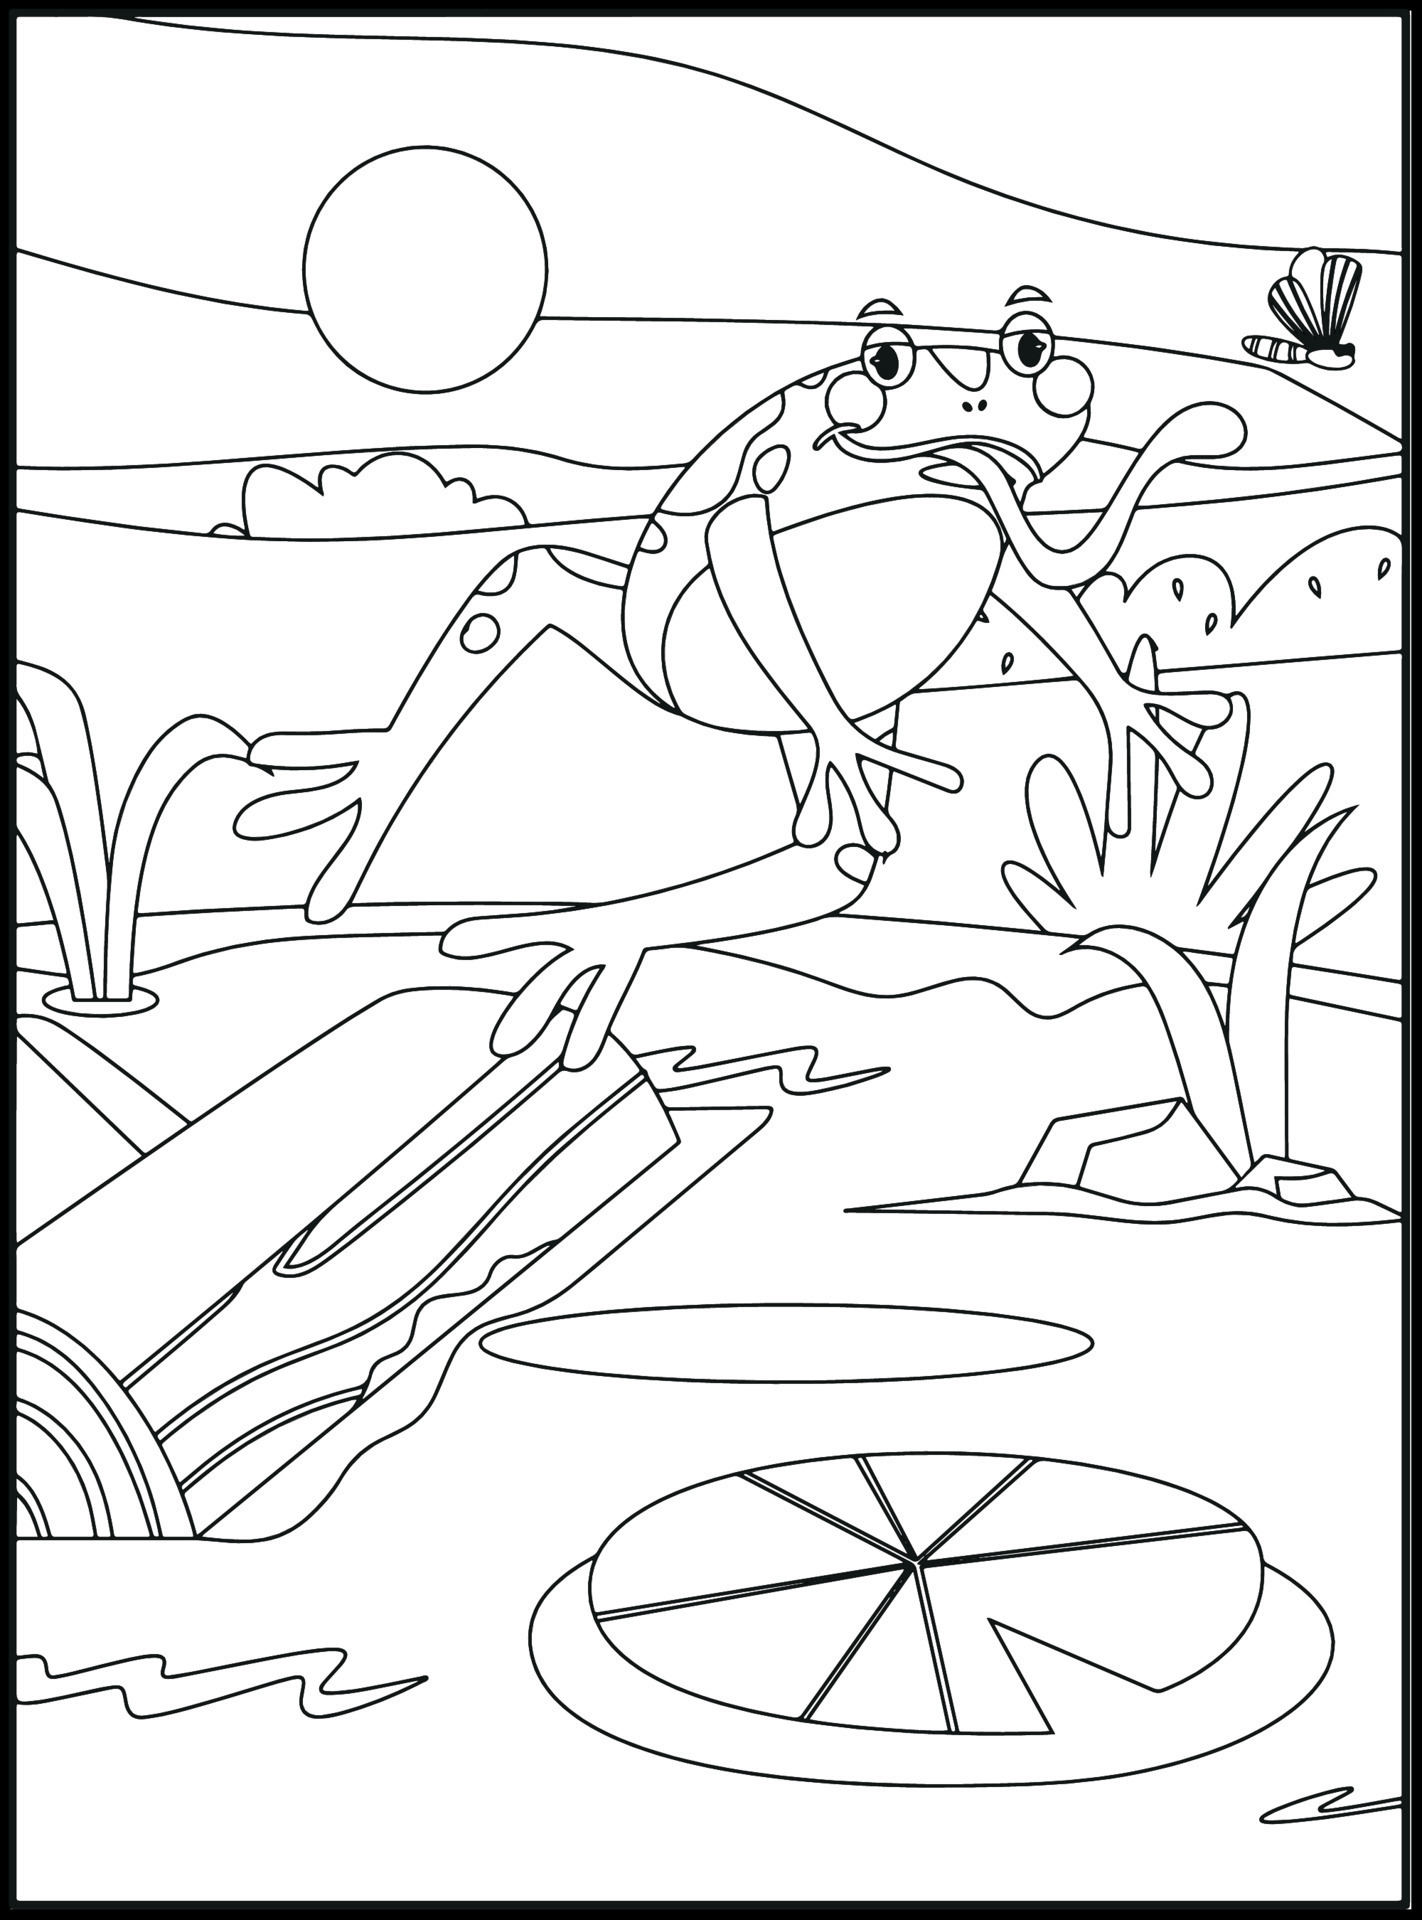 190+ Frog Coloring Page Designs 187